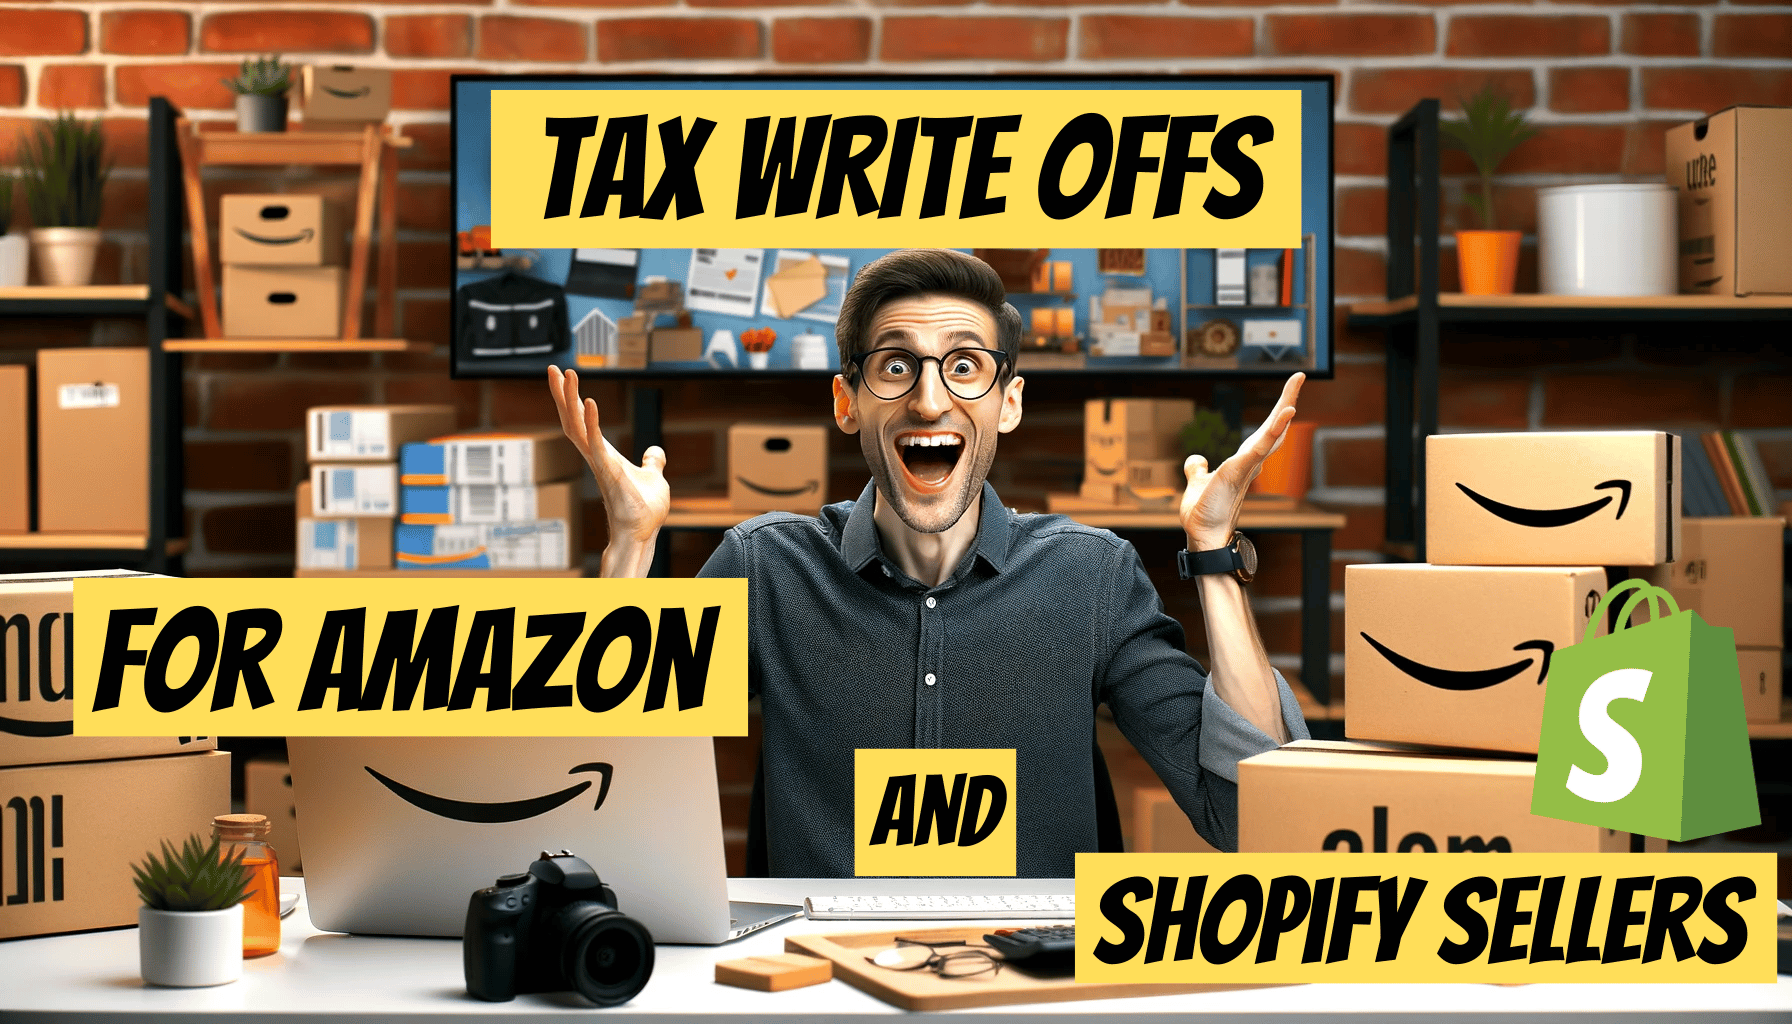 Tax Write Offs for Amazon FBA and Shopify Sellers